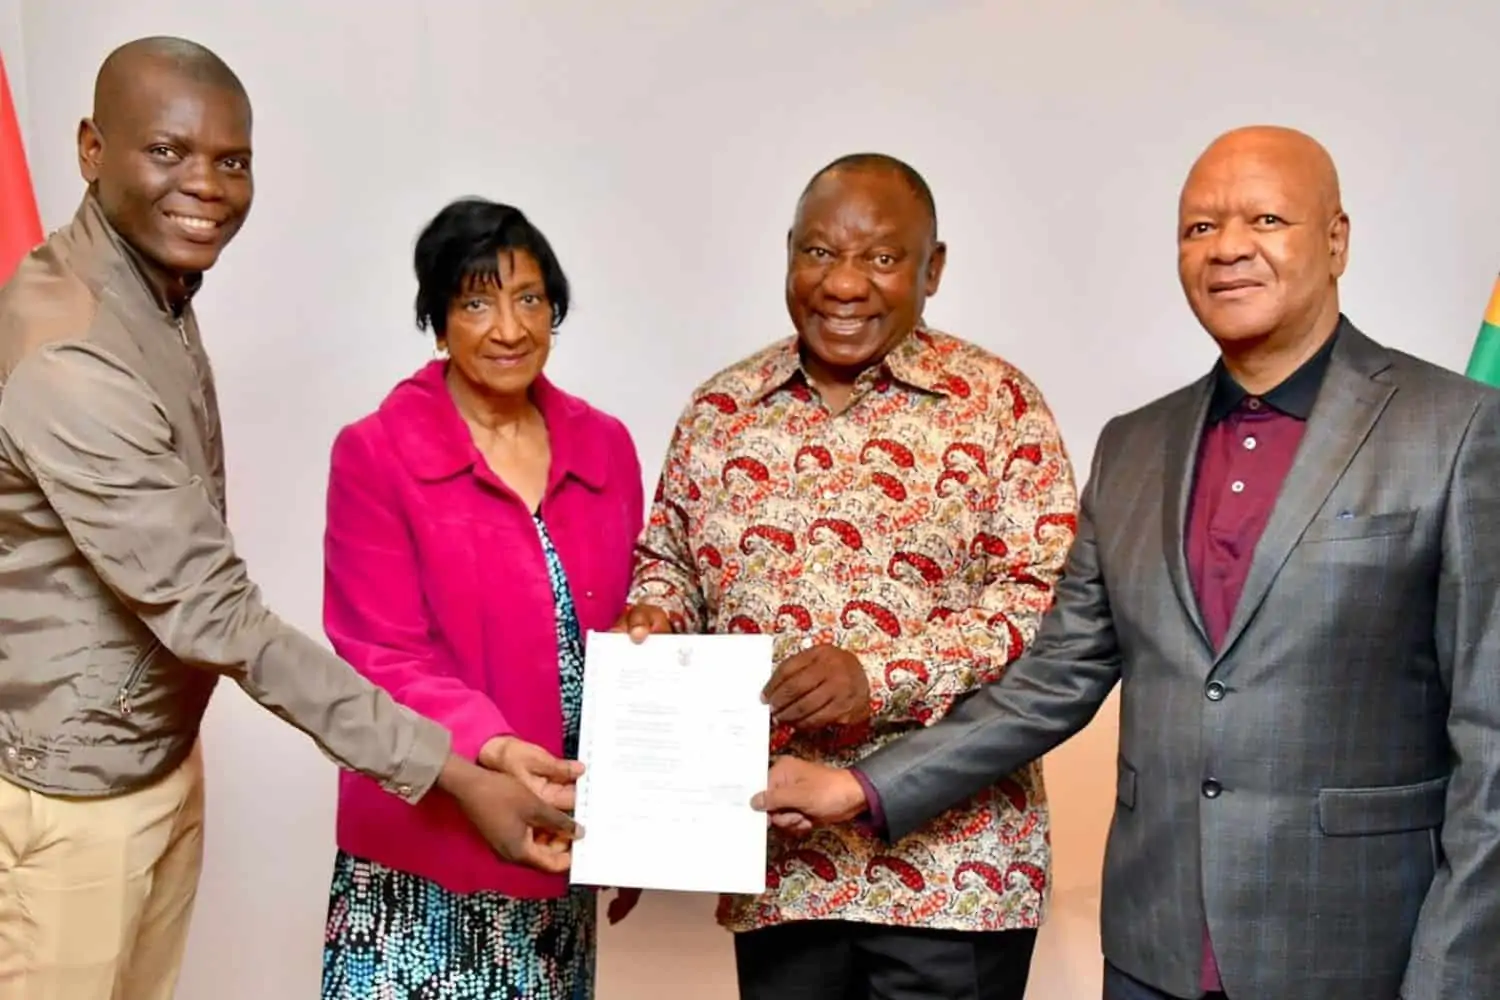 Chief Justice nomination report presented to President Ramaphosa